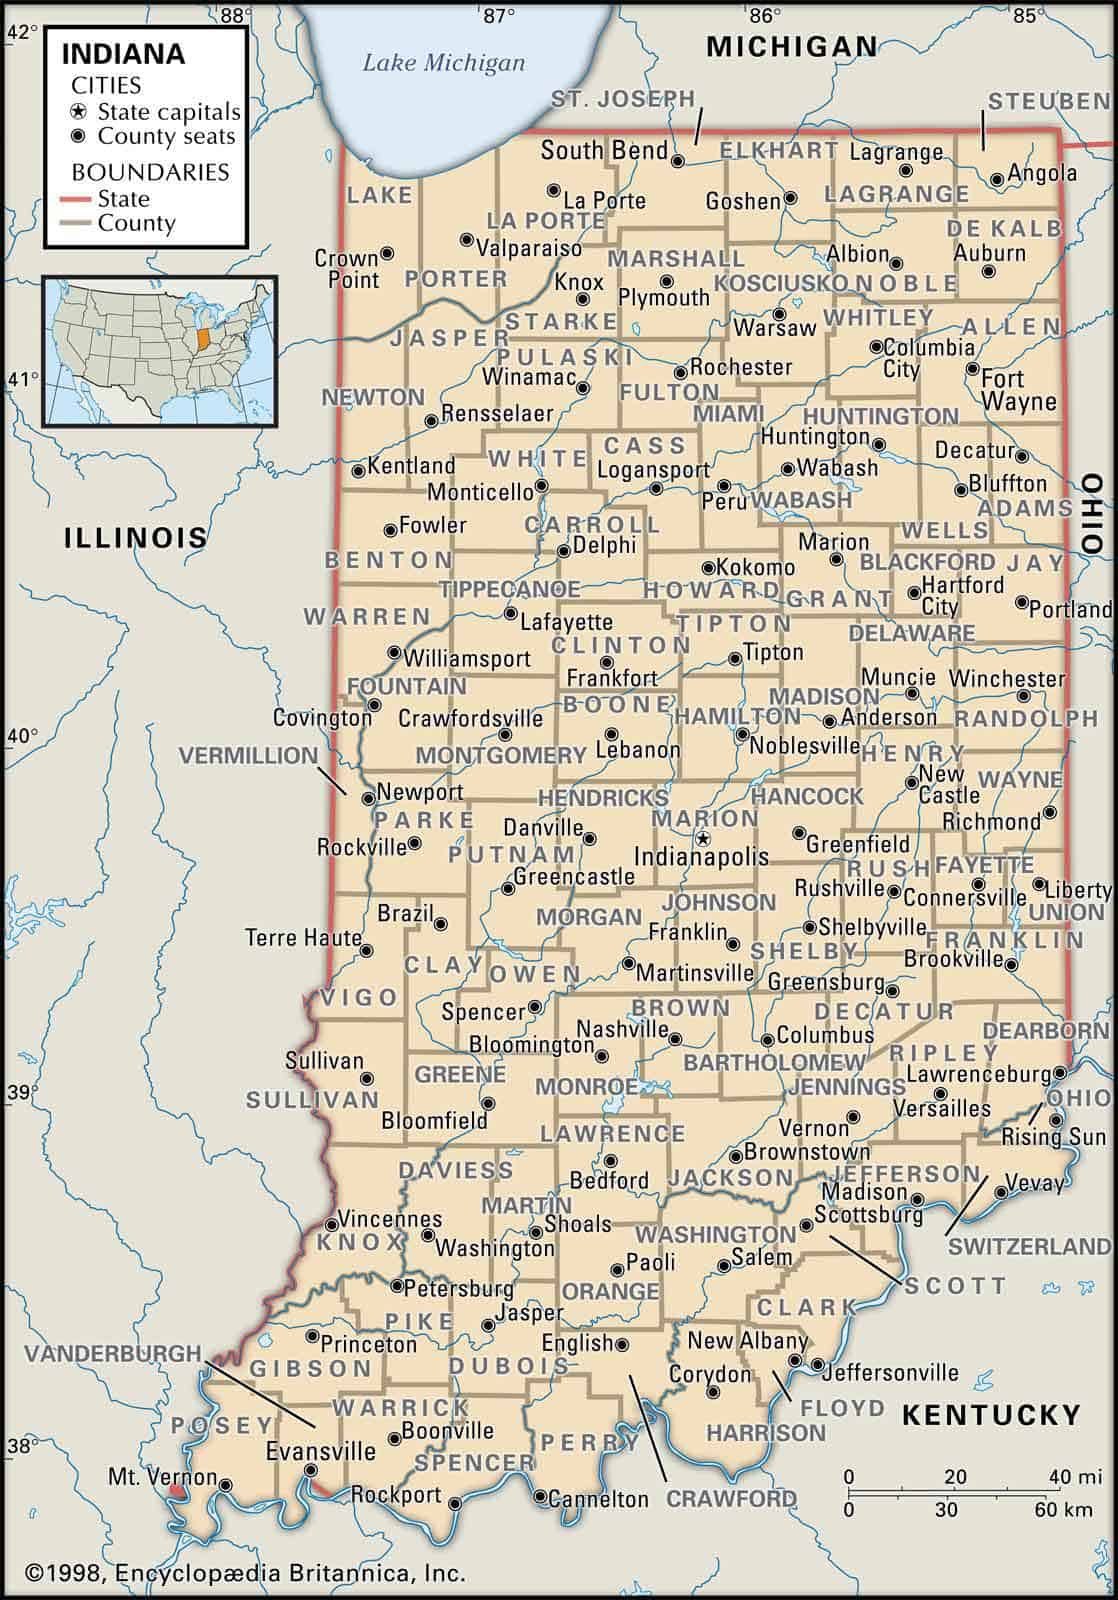 History and Facts of Indiana Counties